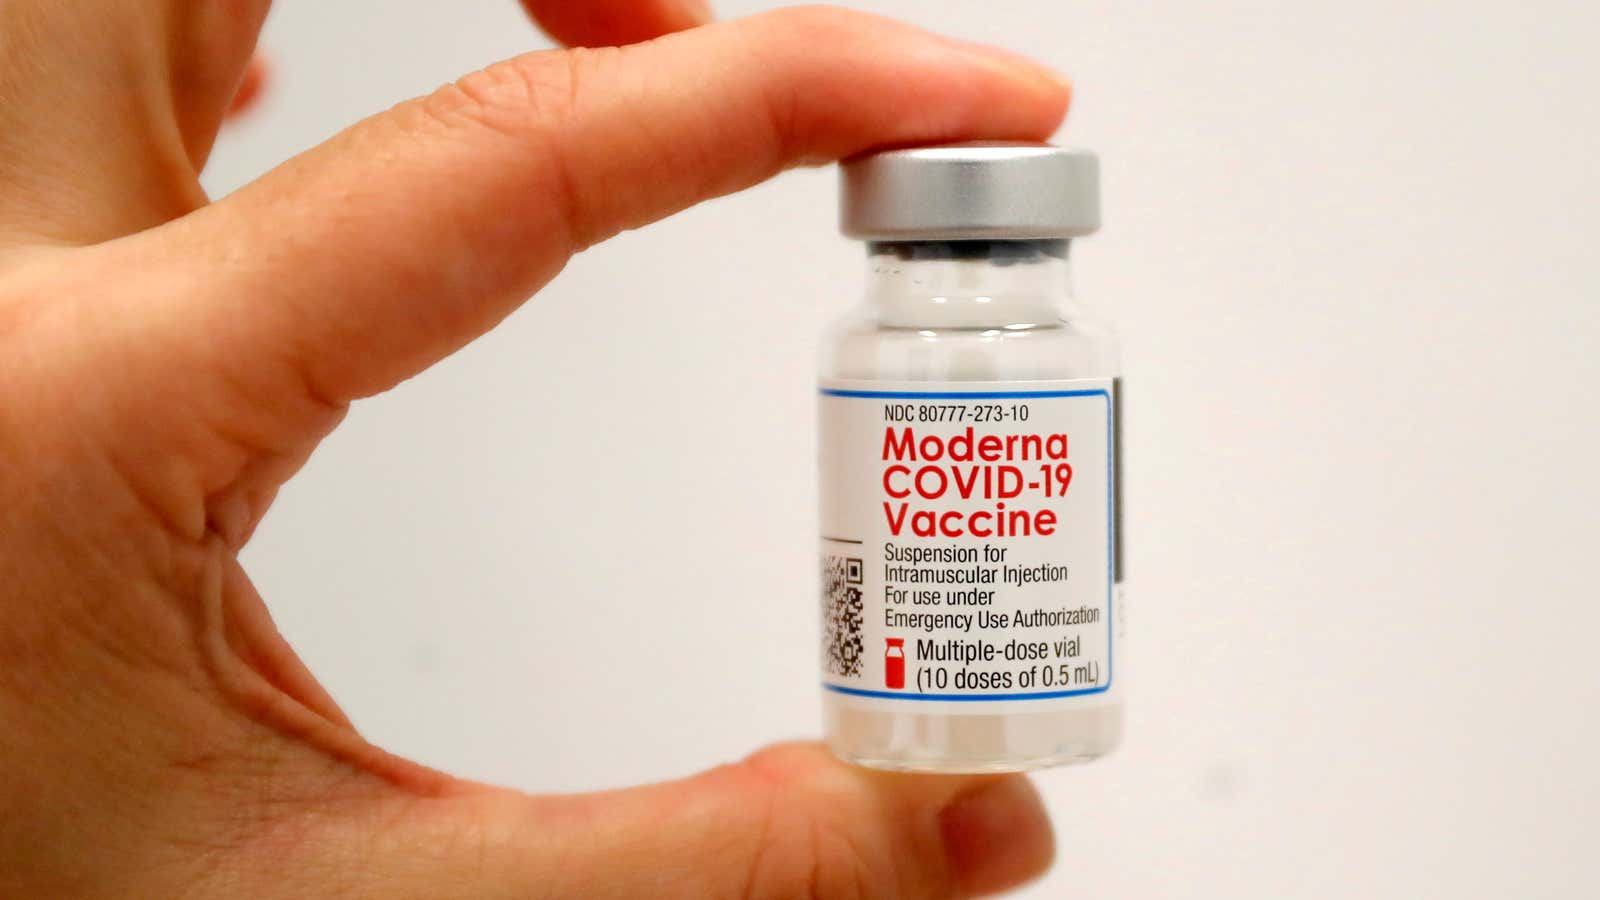 Who holds the rights to the vaccine?